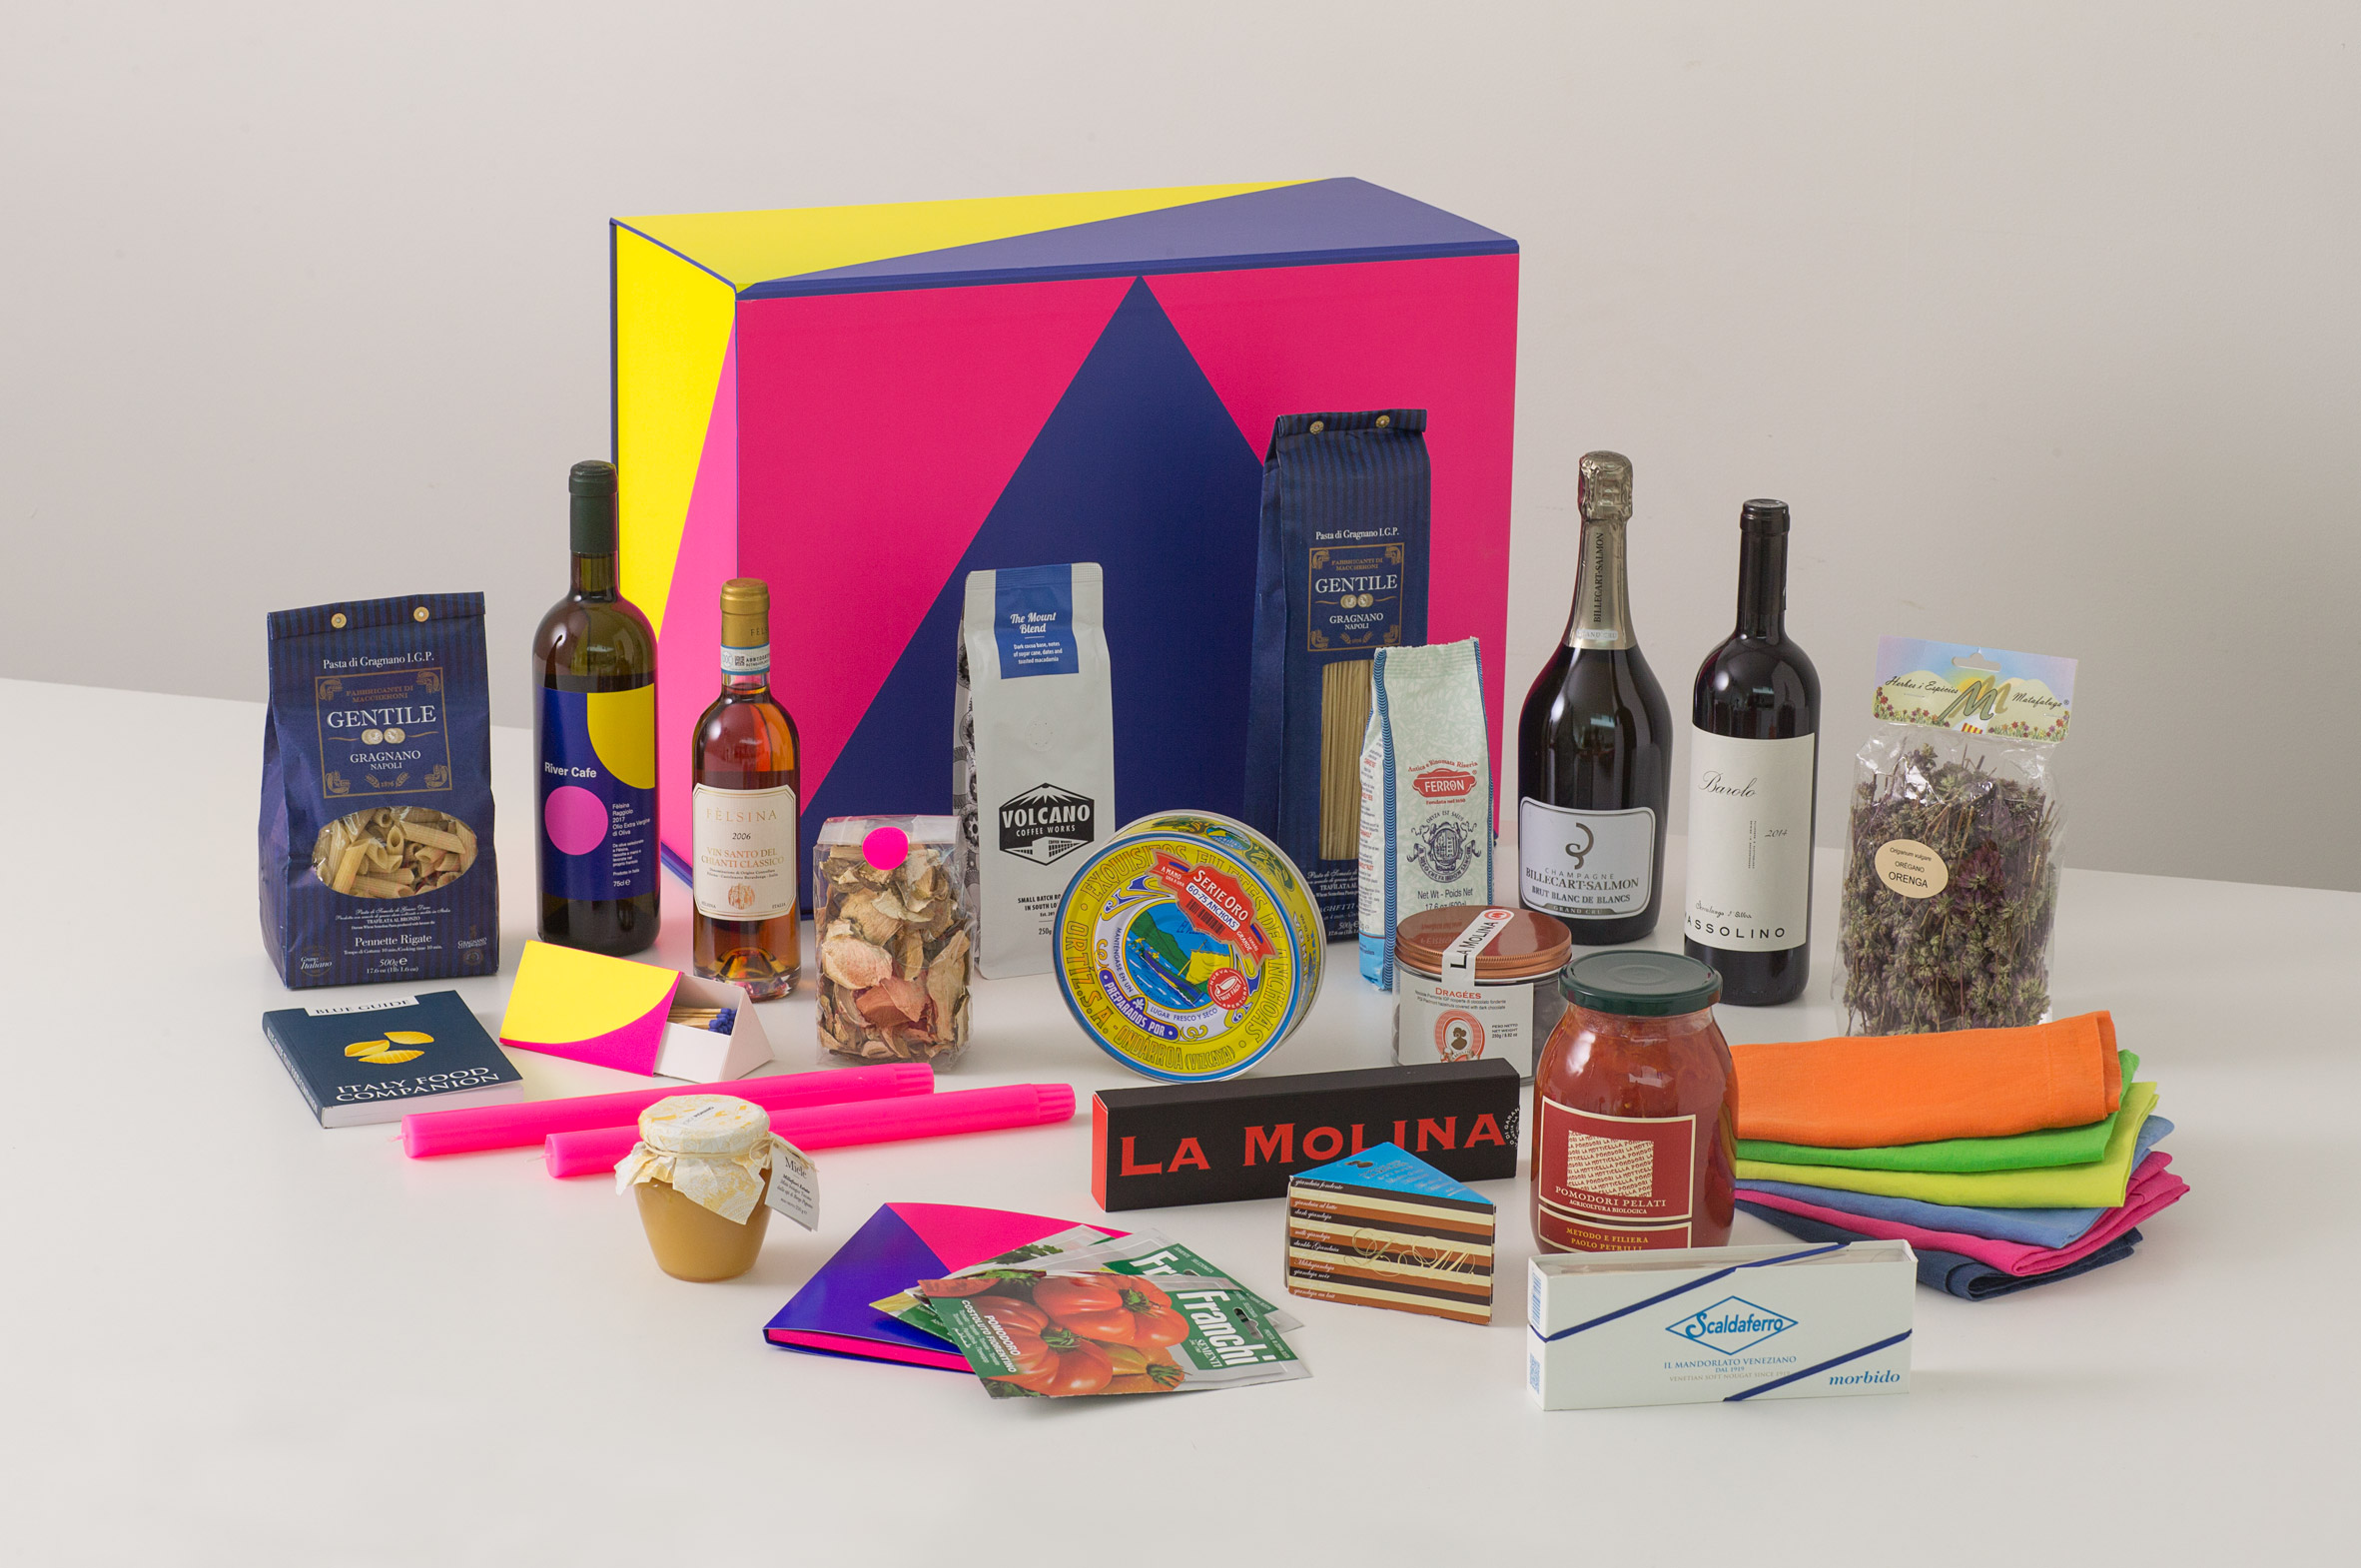 River Cafe restaurant releases limited edition gift boxes